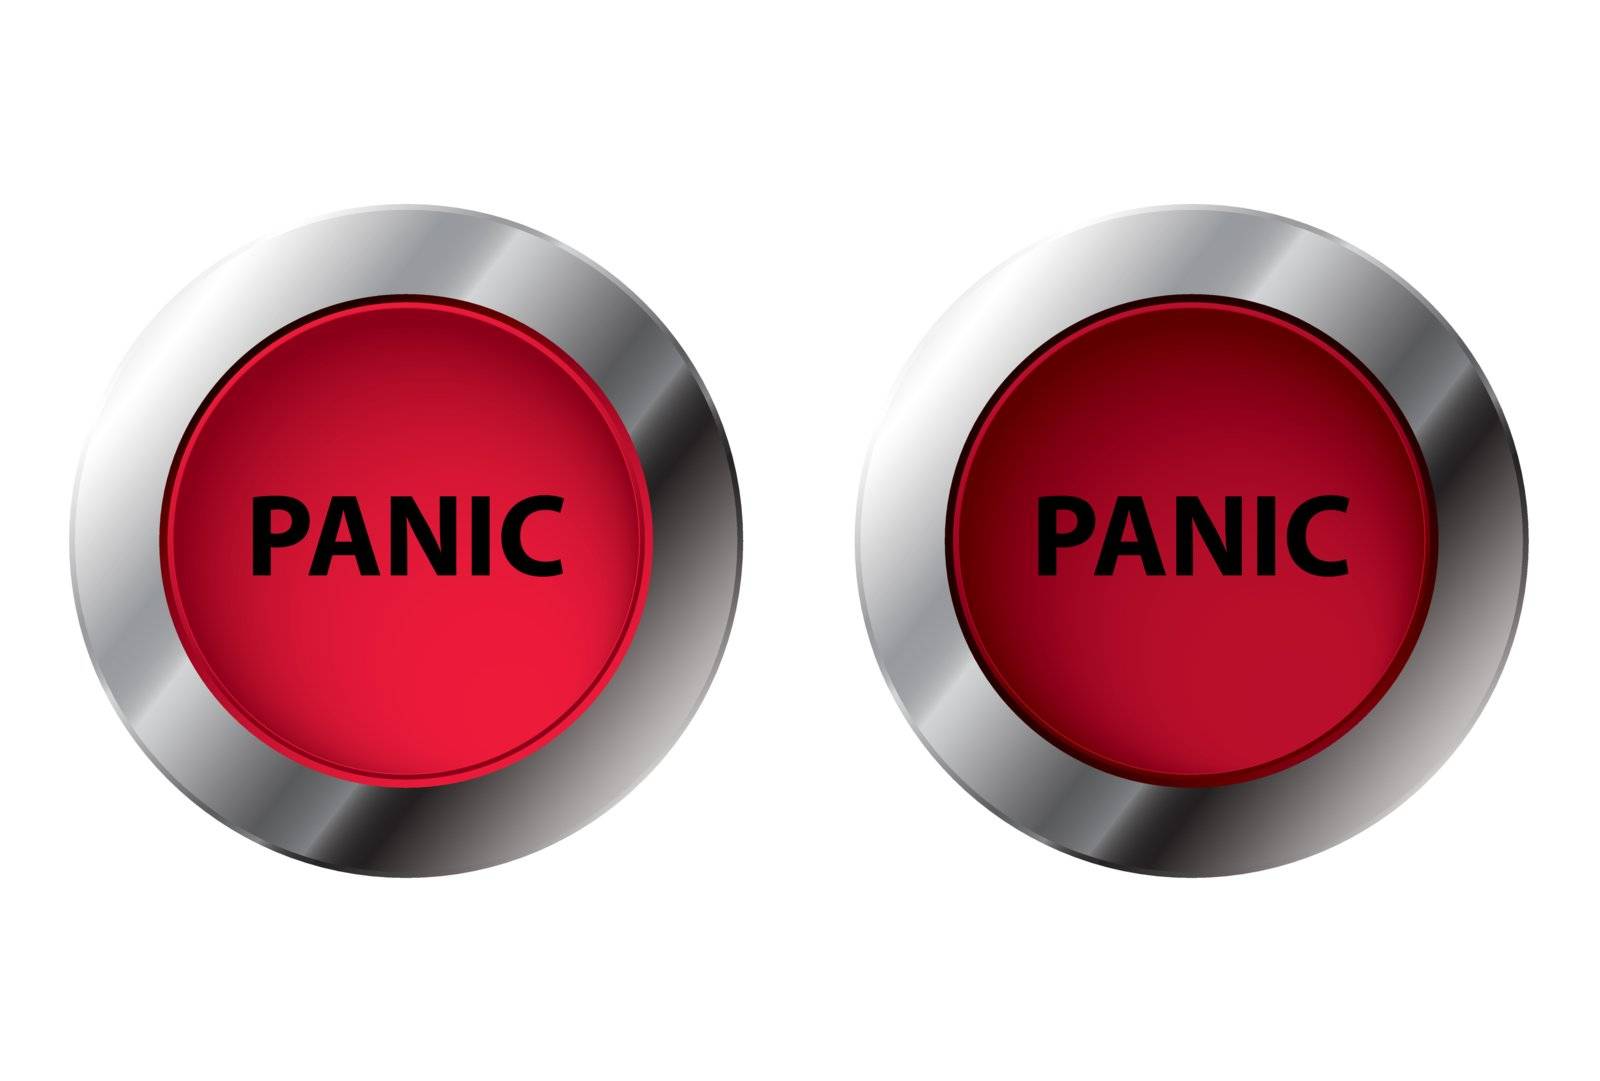 Panic button by milinz